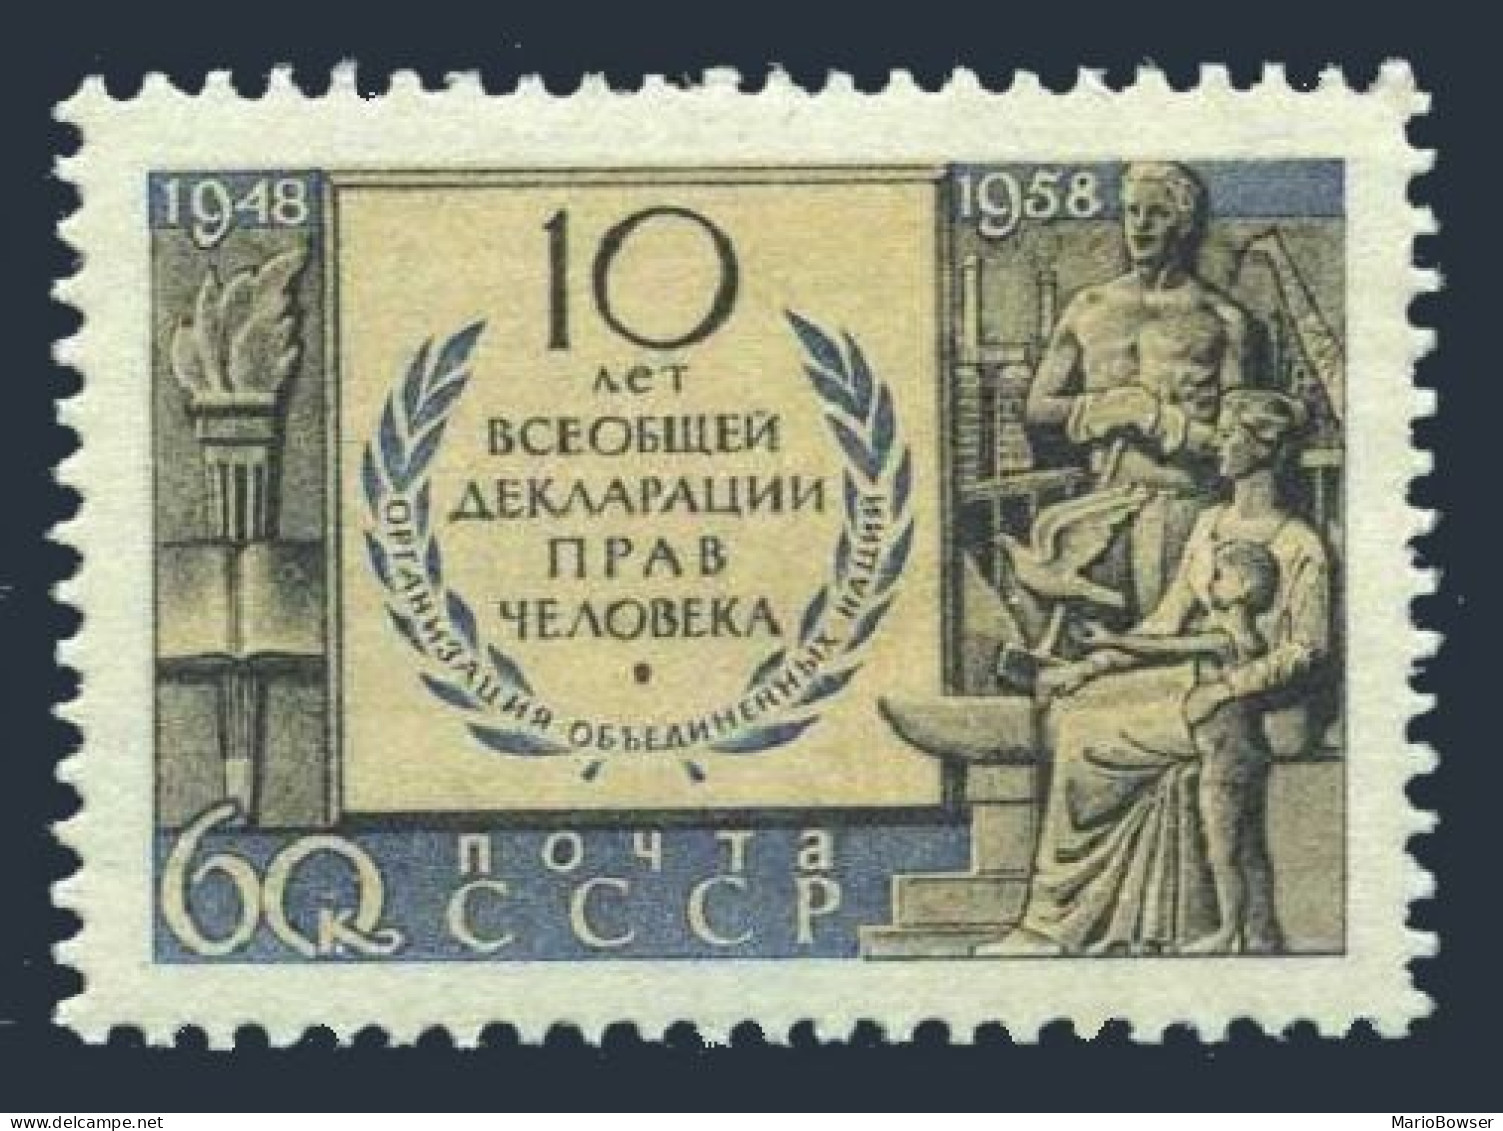 Russia 2143, MNH. Michel 2168. Declaration Of Human Rights, 10, 1958. - Unused Stamps